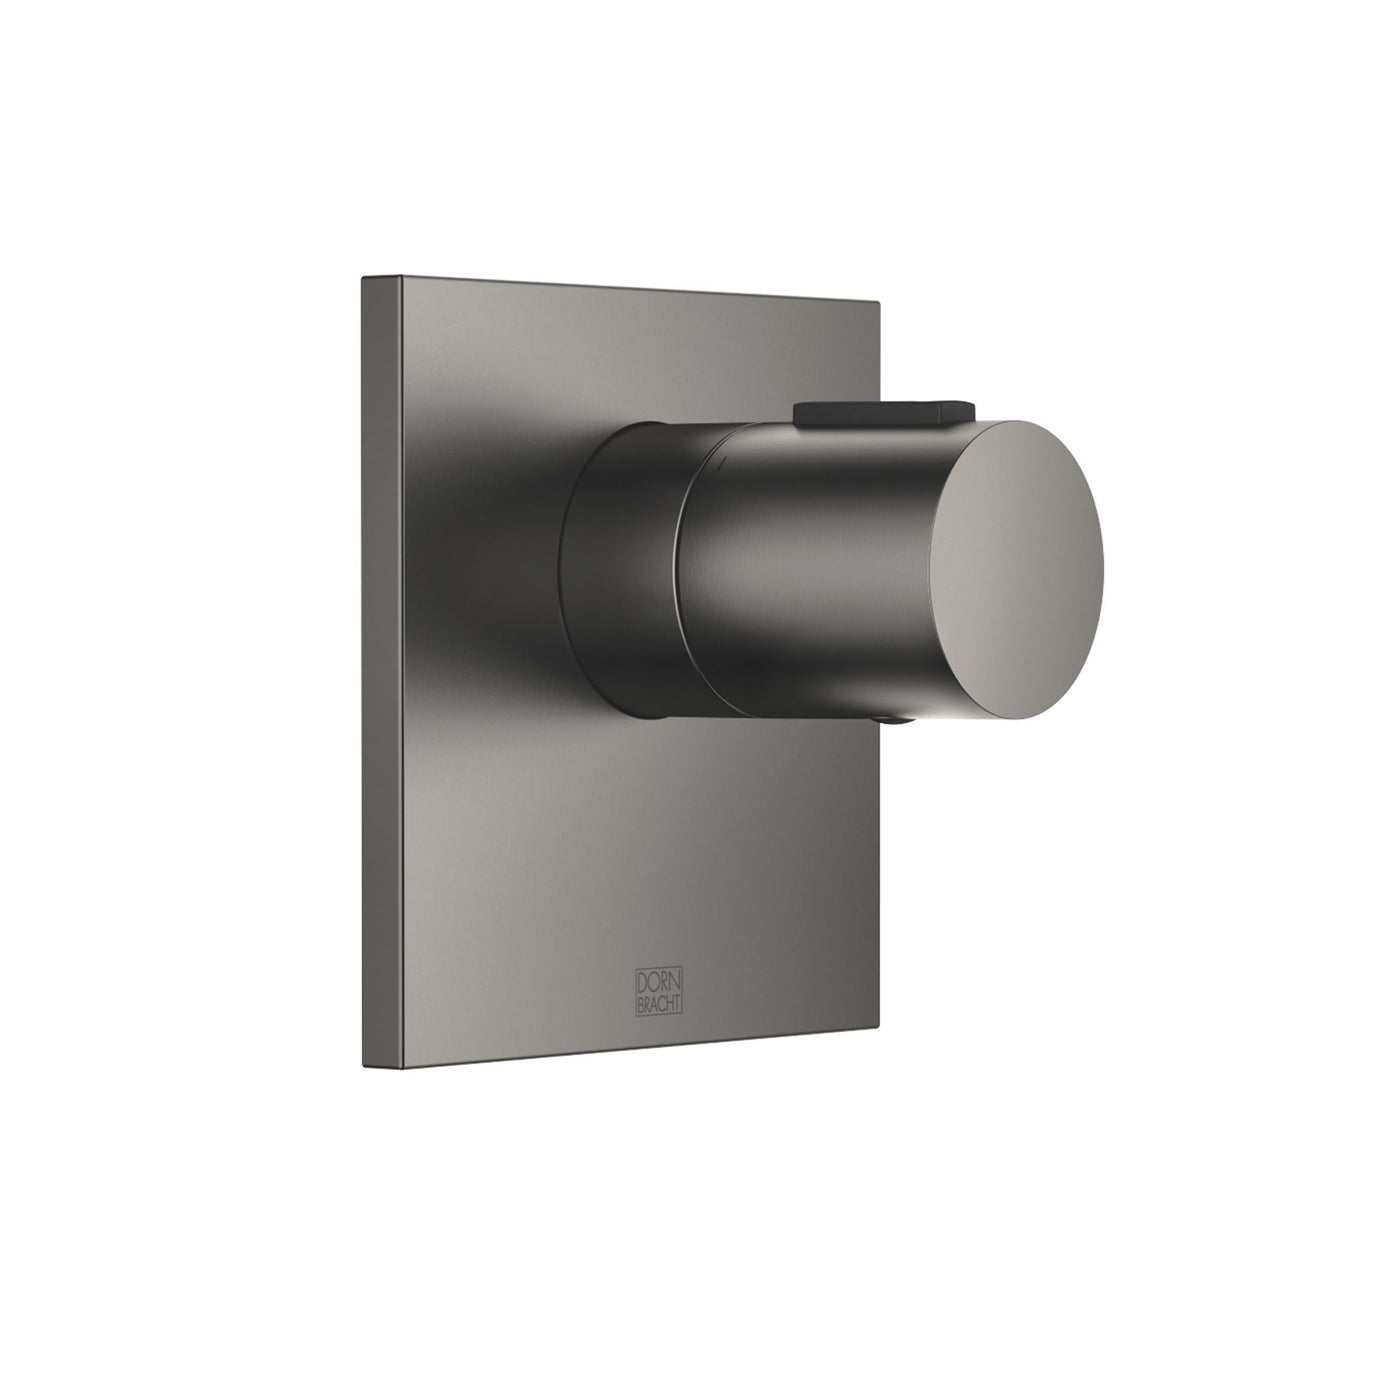 3/4" SERIES SPECIFIC xTOOL Concealed thermostat without volume control - Brushed Dark Platinum